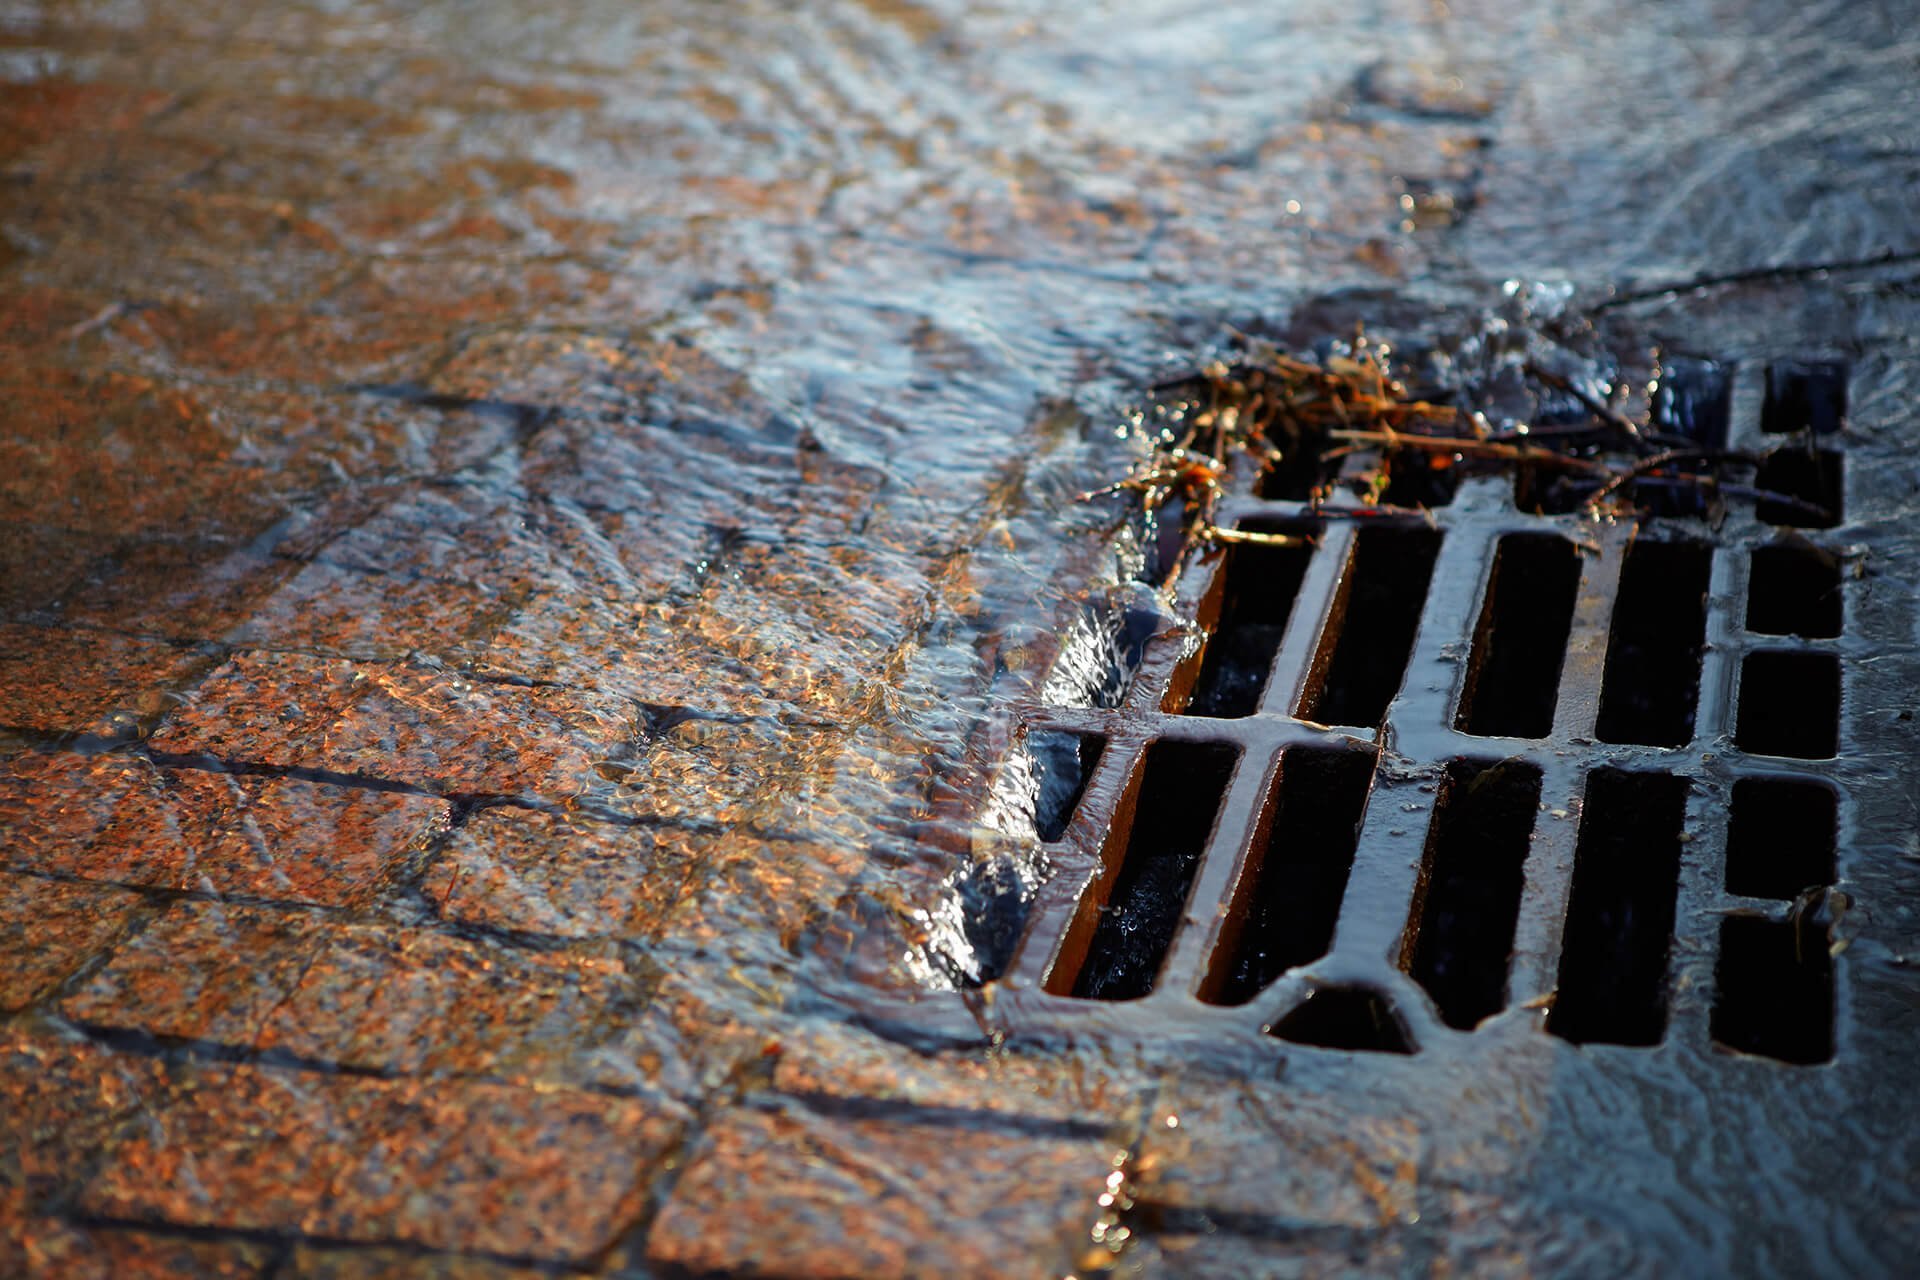 roto-rooter-Storm Sewer Cleaning Services - Water Passing In Sewer